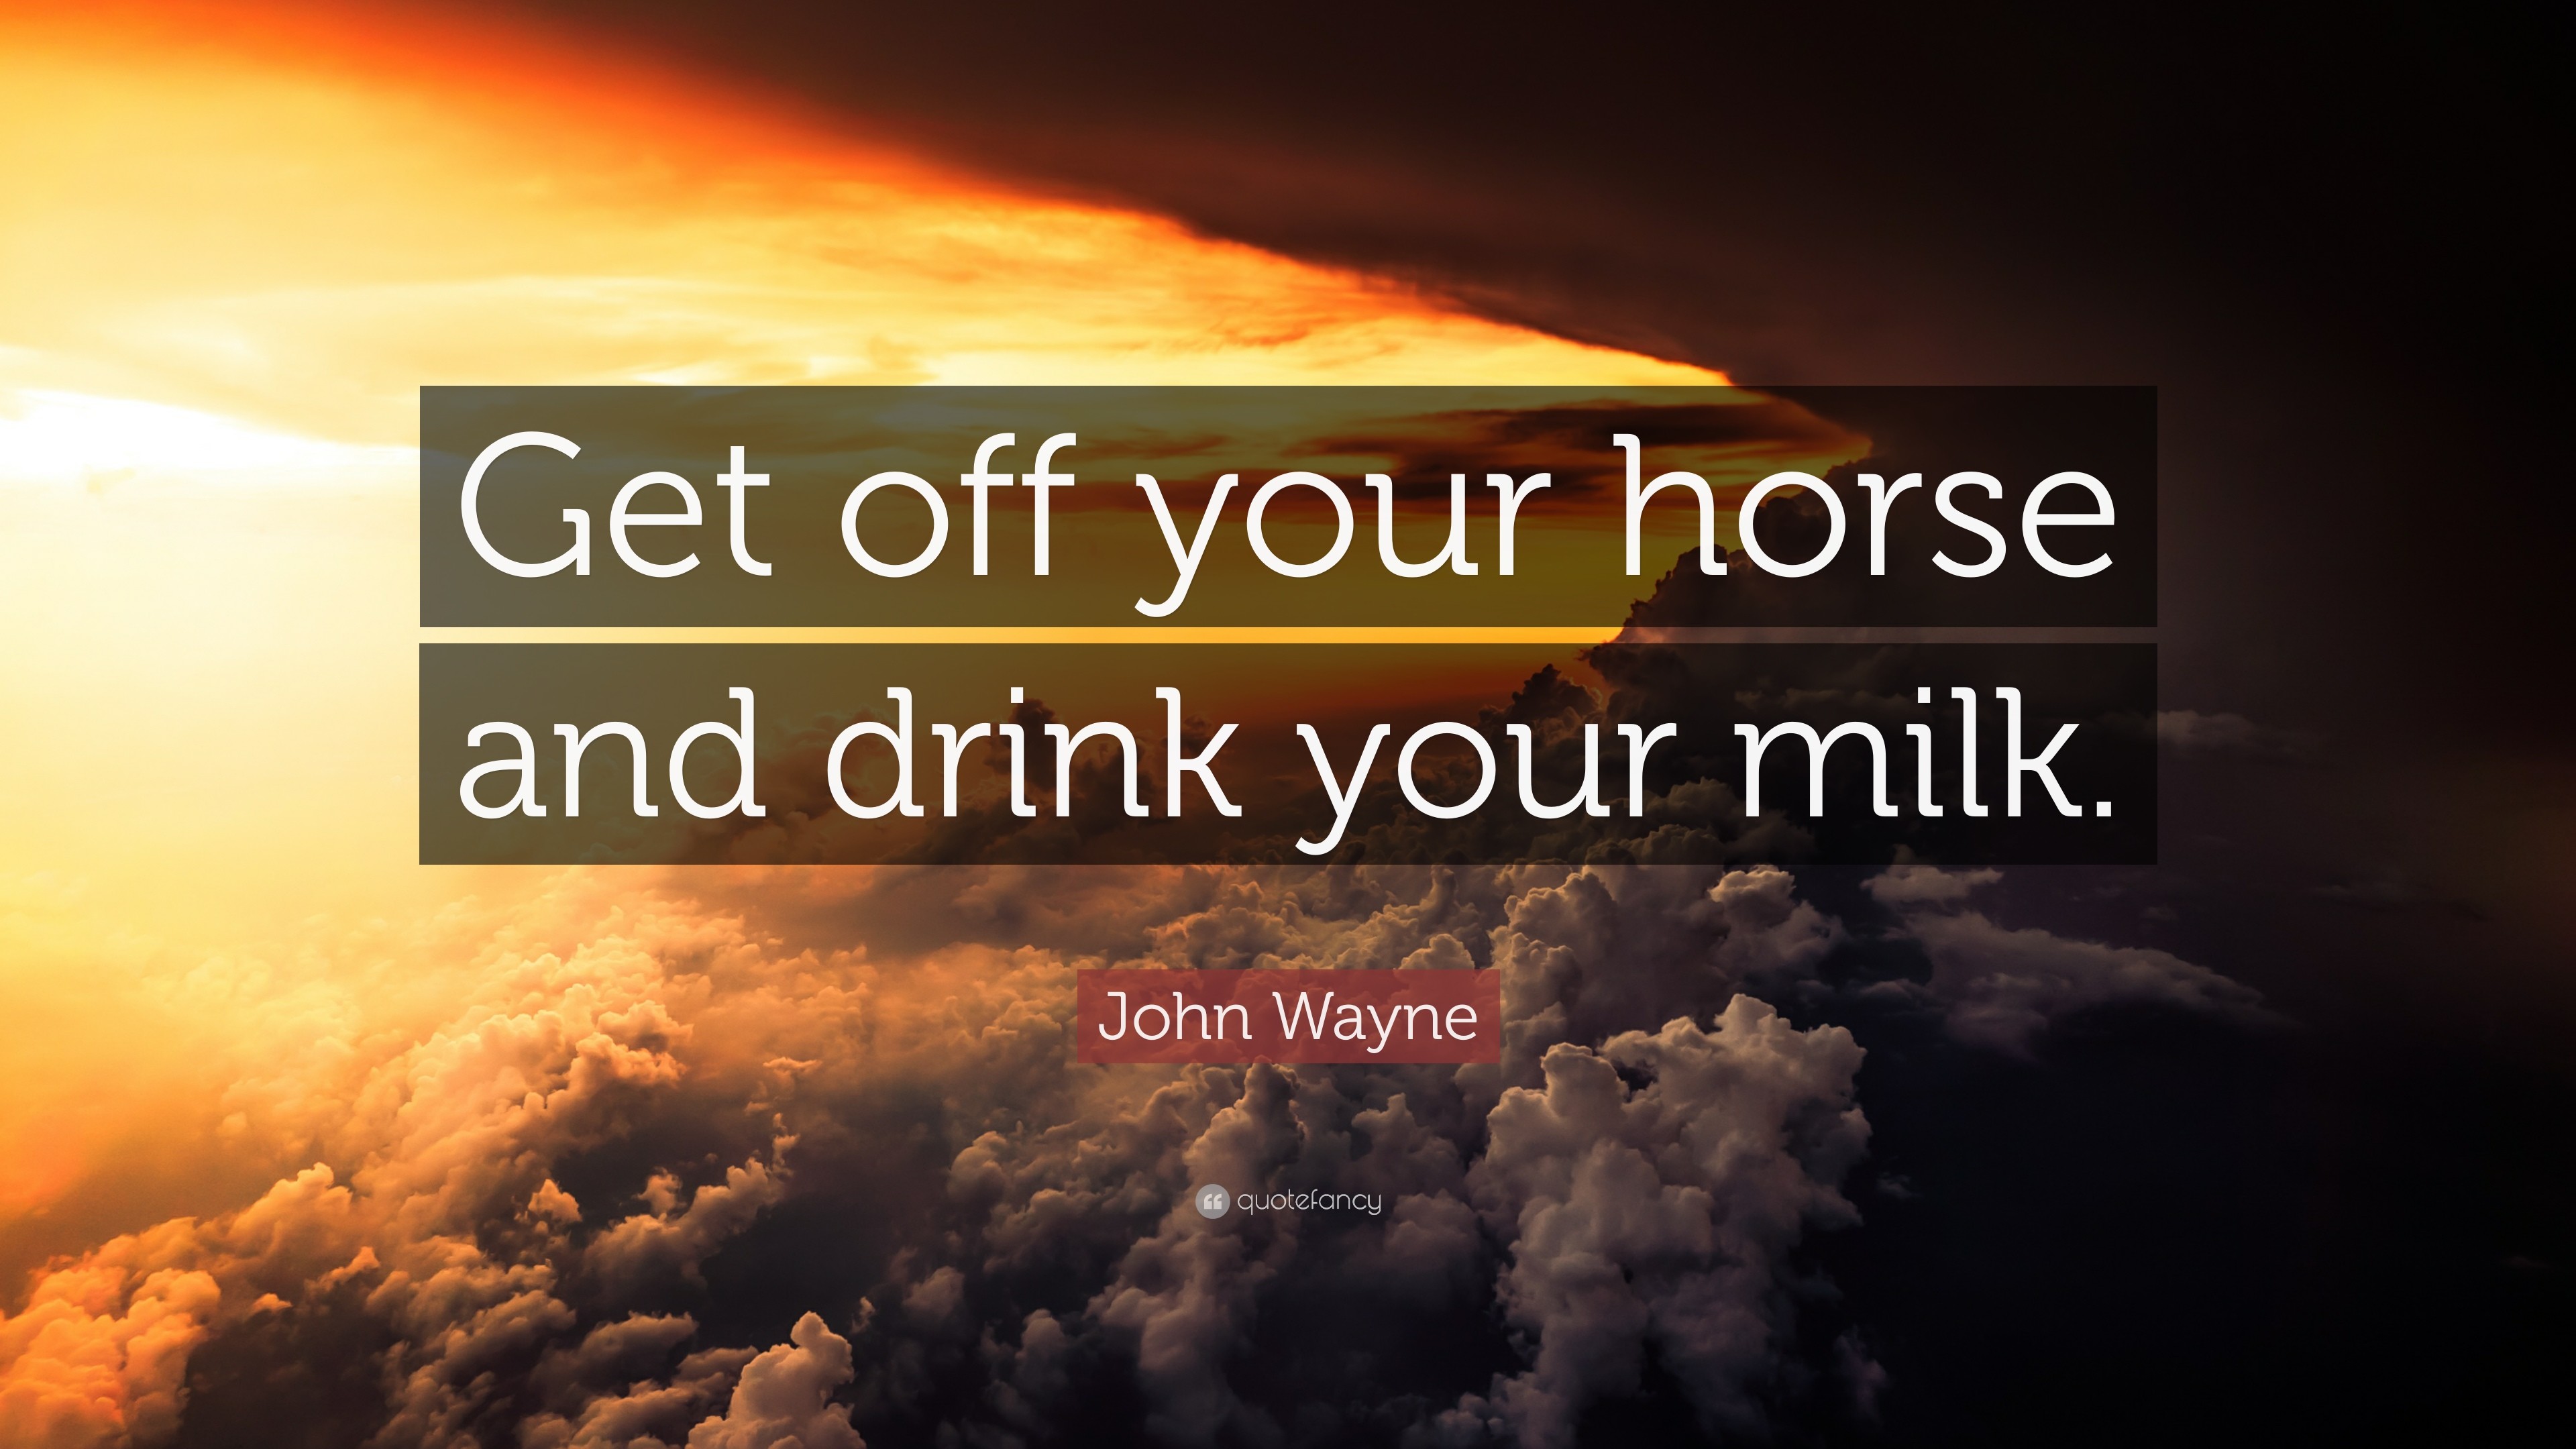 3840x2160 John Wayne Quote: “Get off your horse and drink your milk.”